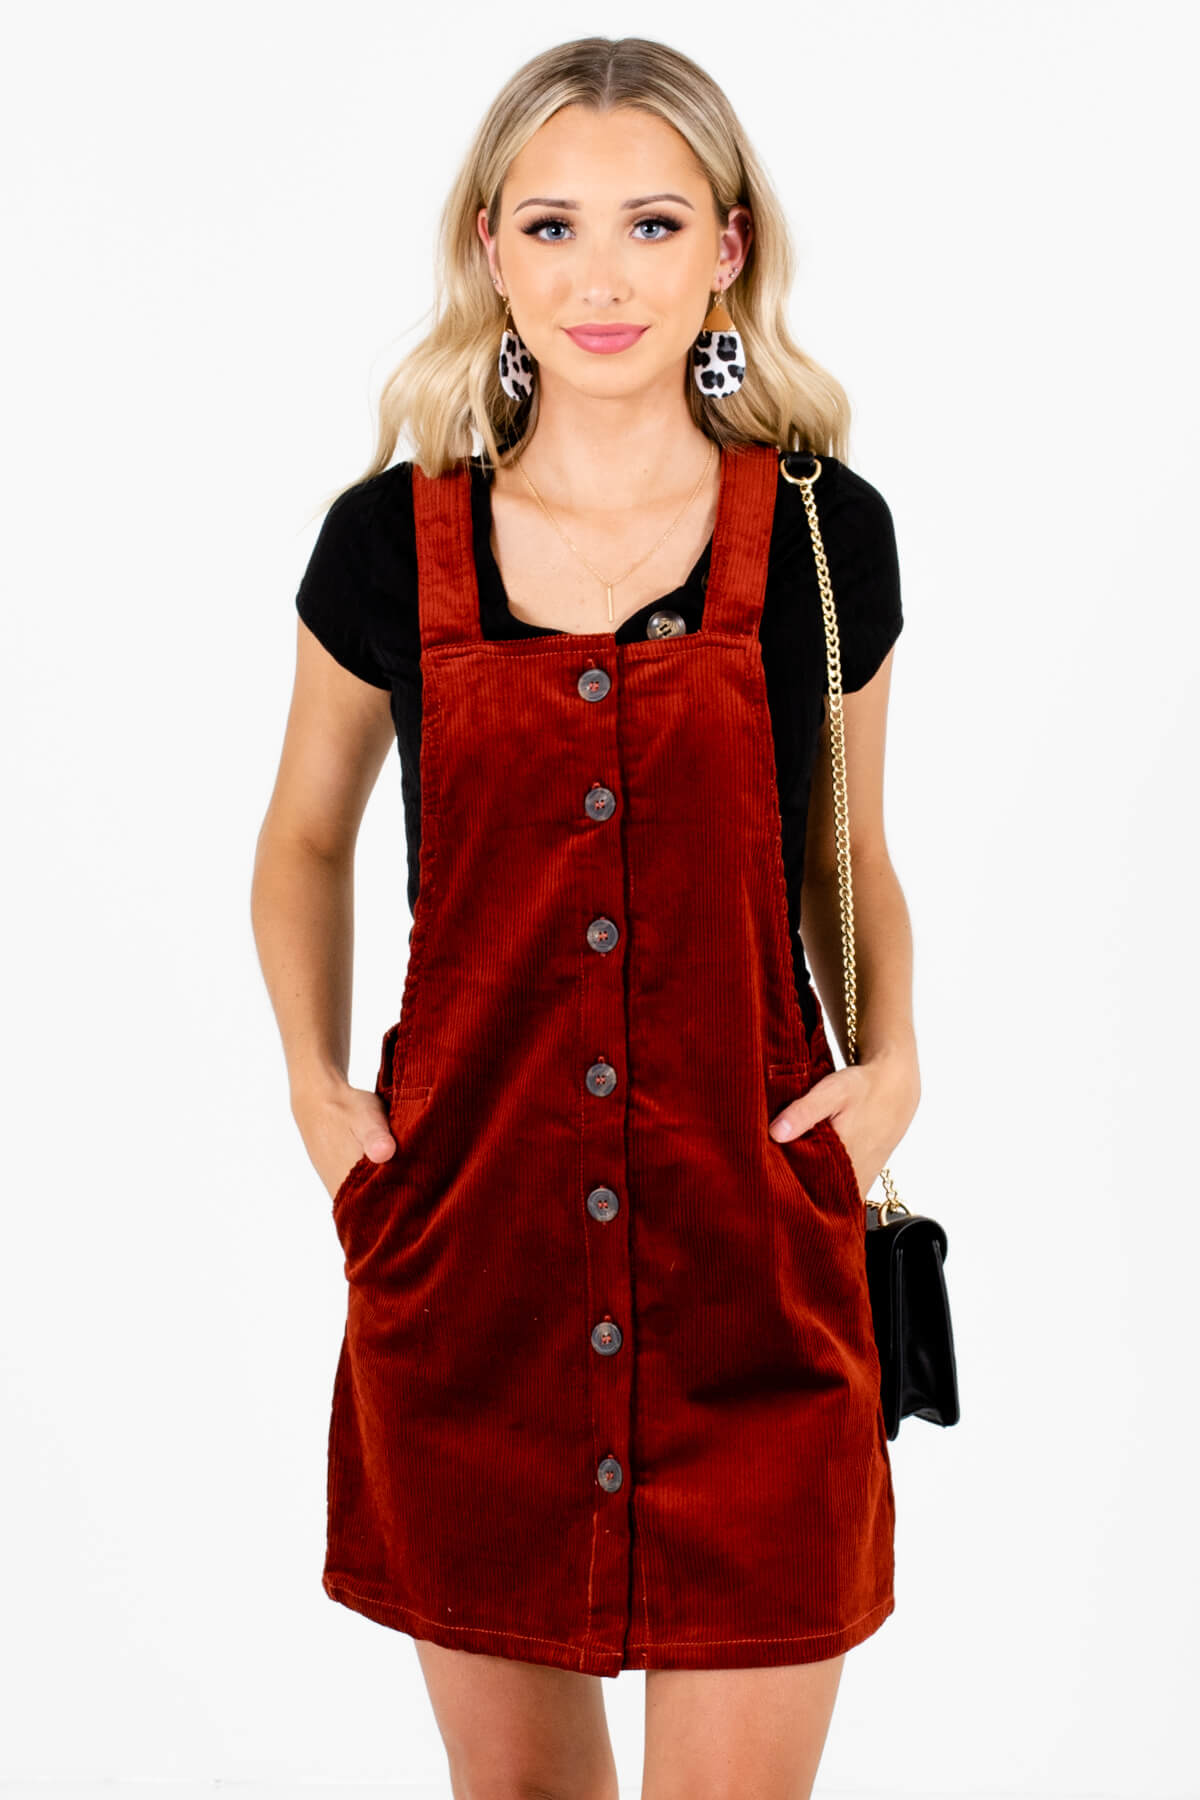 Rust Red Corduroy Material Boutique Mini Dresses for Women